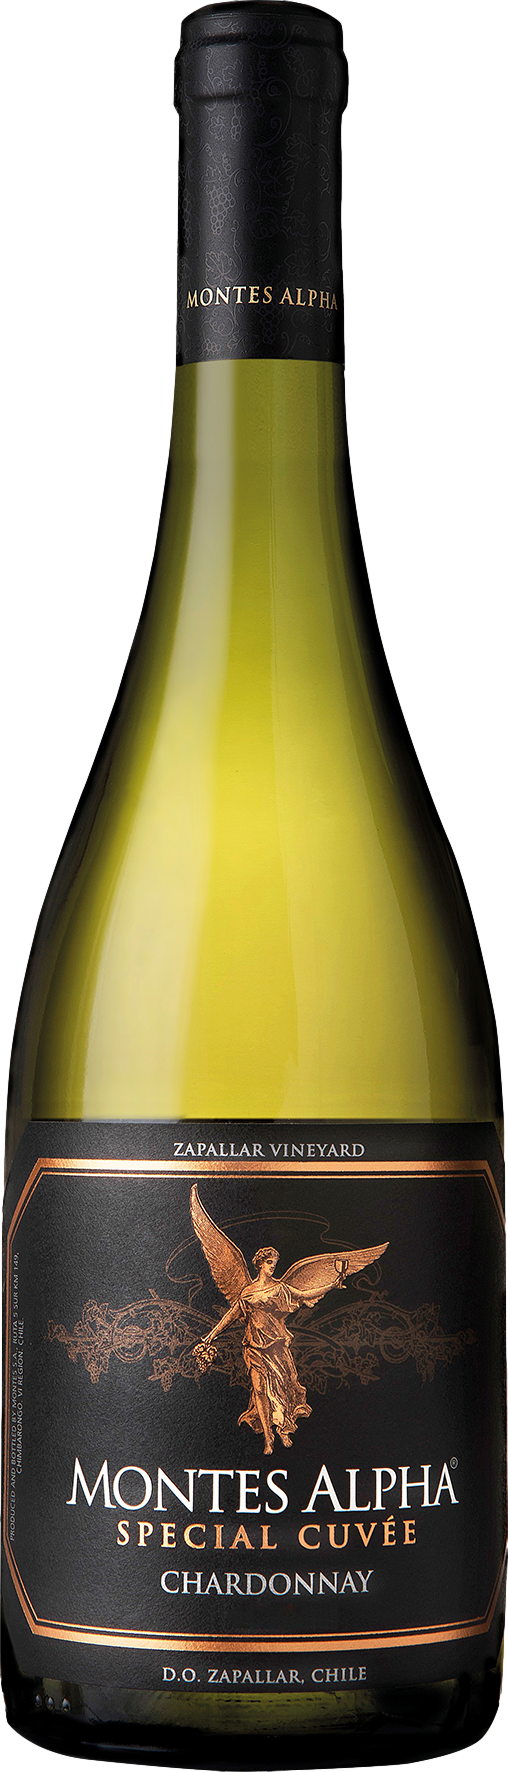 Montes Alpha Special Cuvee Chardonnay 2020 Montes 8wines DACH